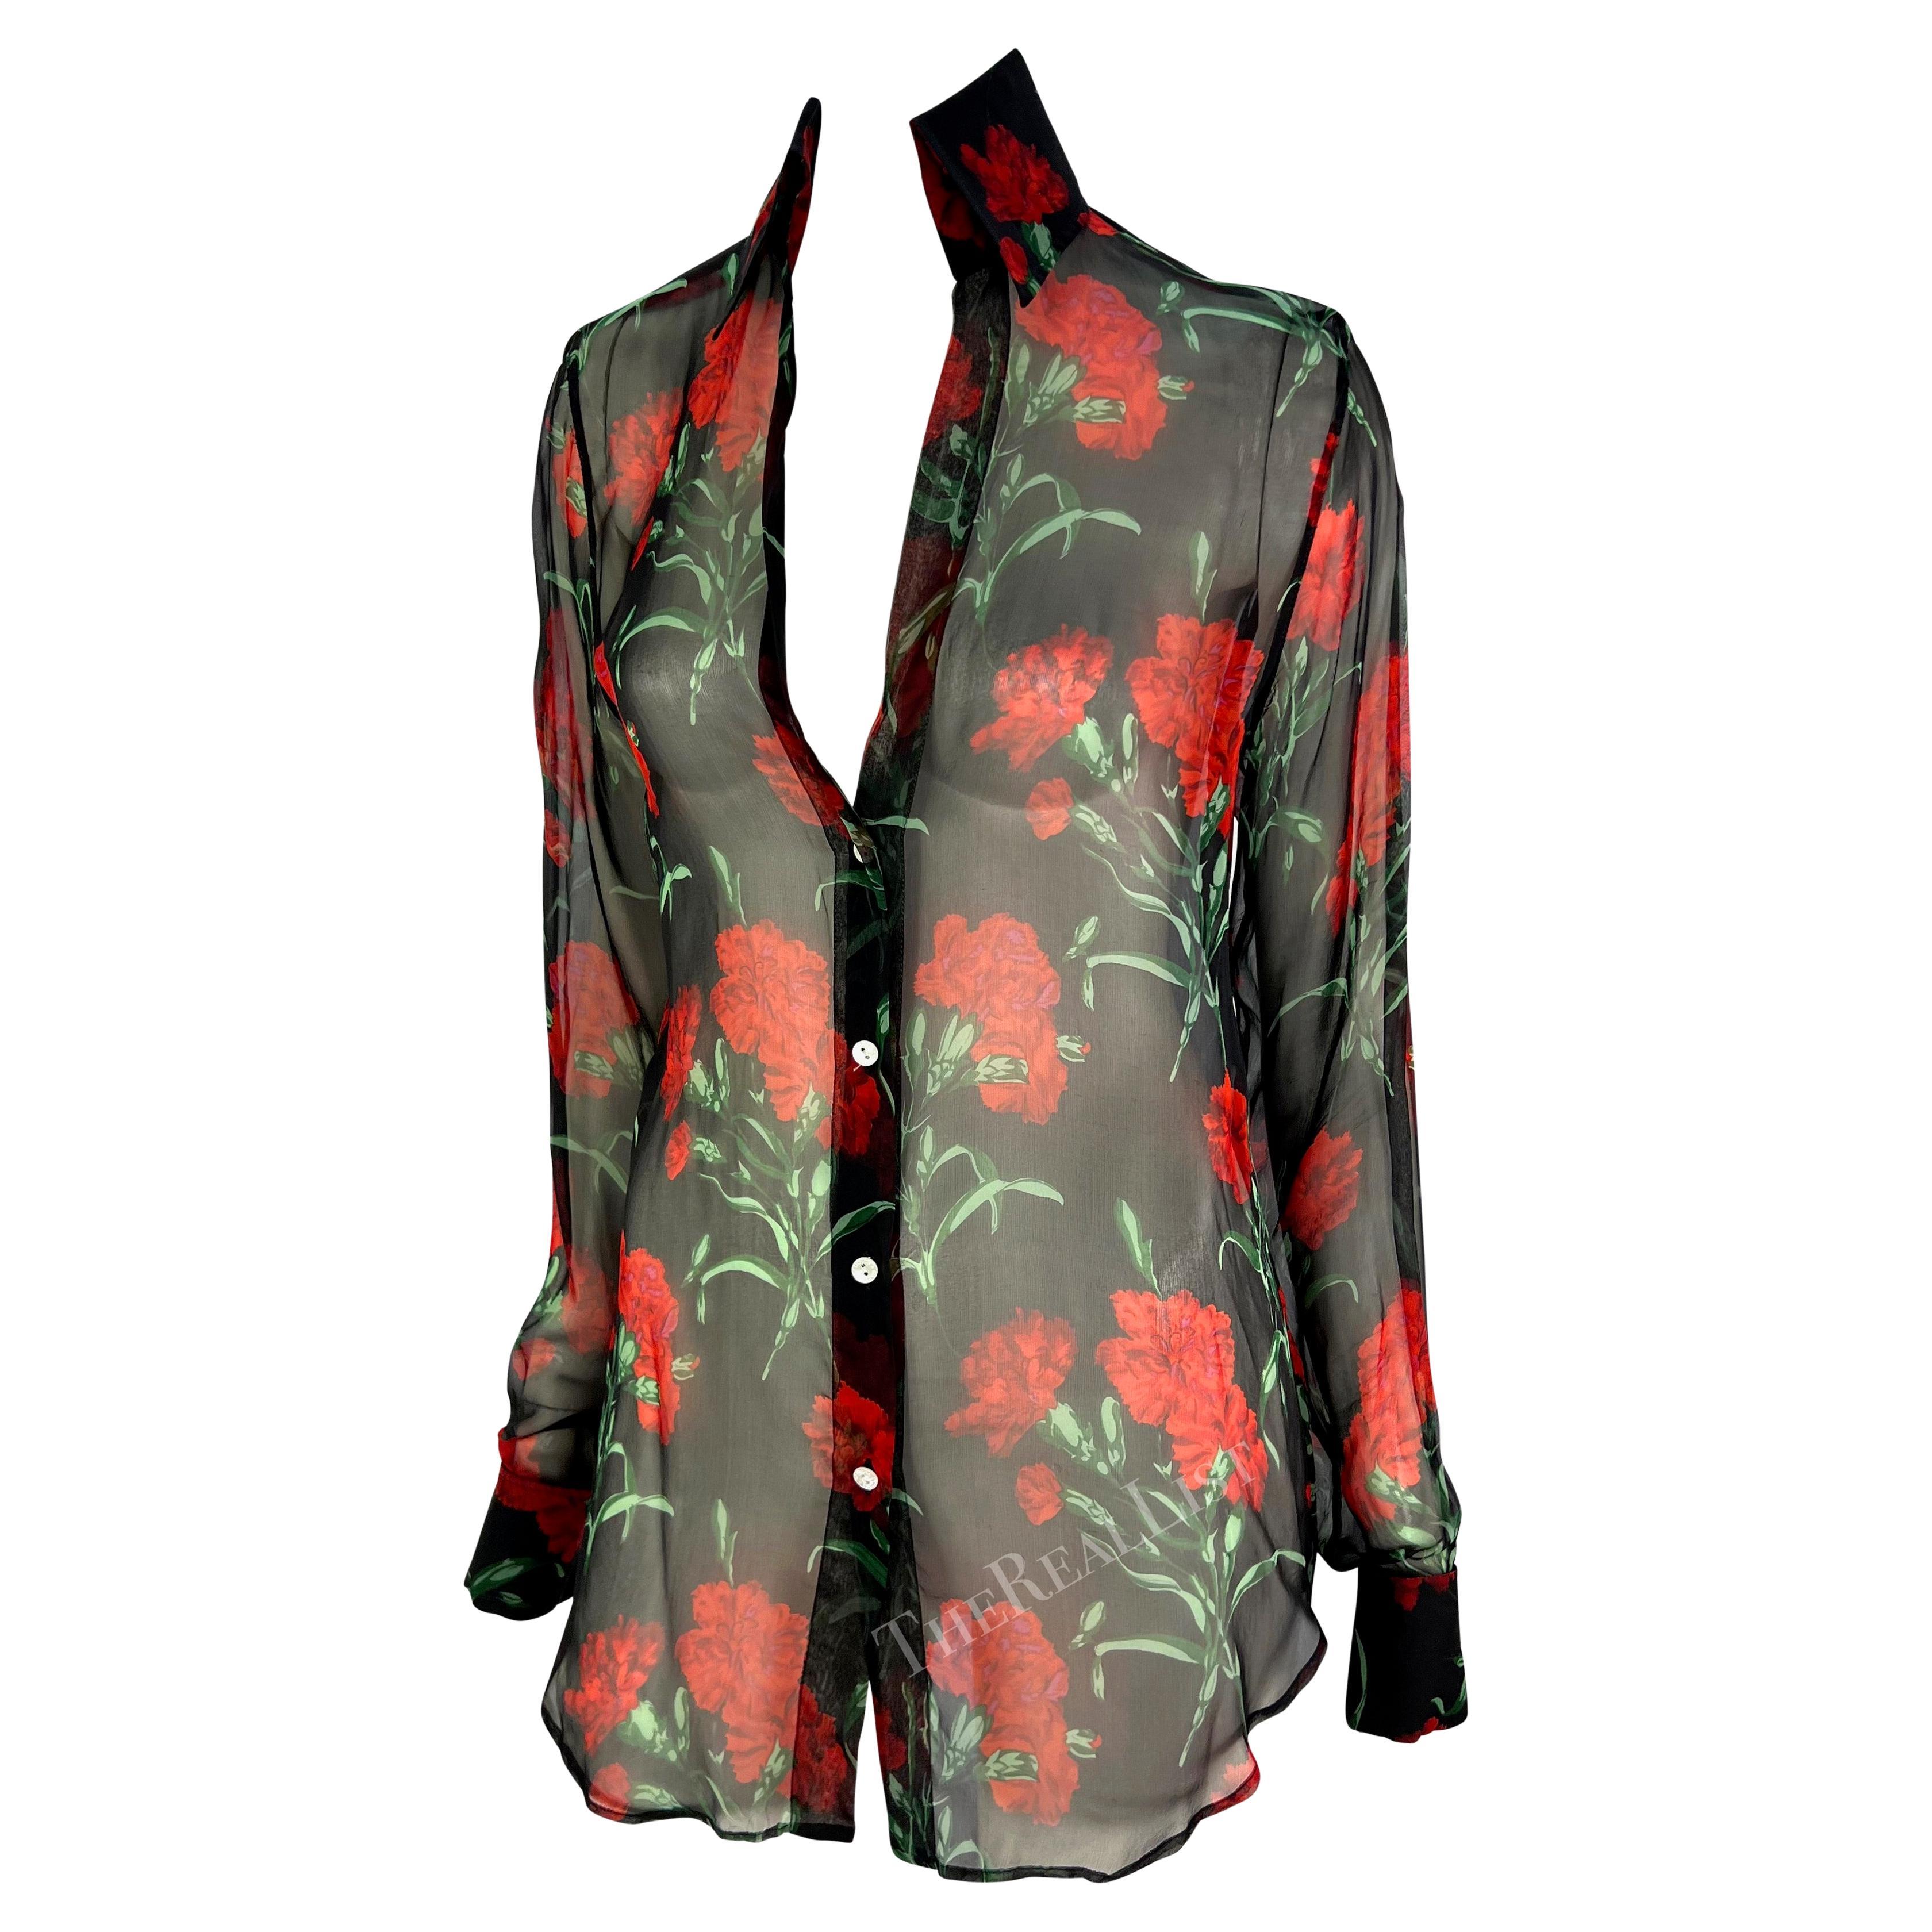 TheRealList presents: a sheer floral Dolce and Gabbana button-down shirt. From the Spring/Summer 2000 collection, this semi-sheer shirt is covered in red carnations with a black background. The top has a plunging neckline and only buttons about